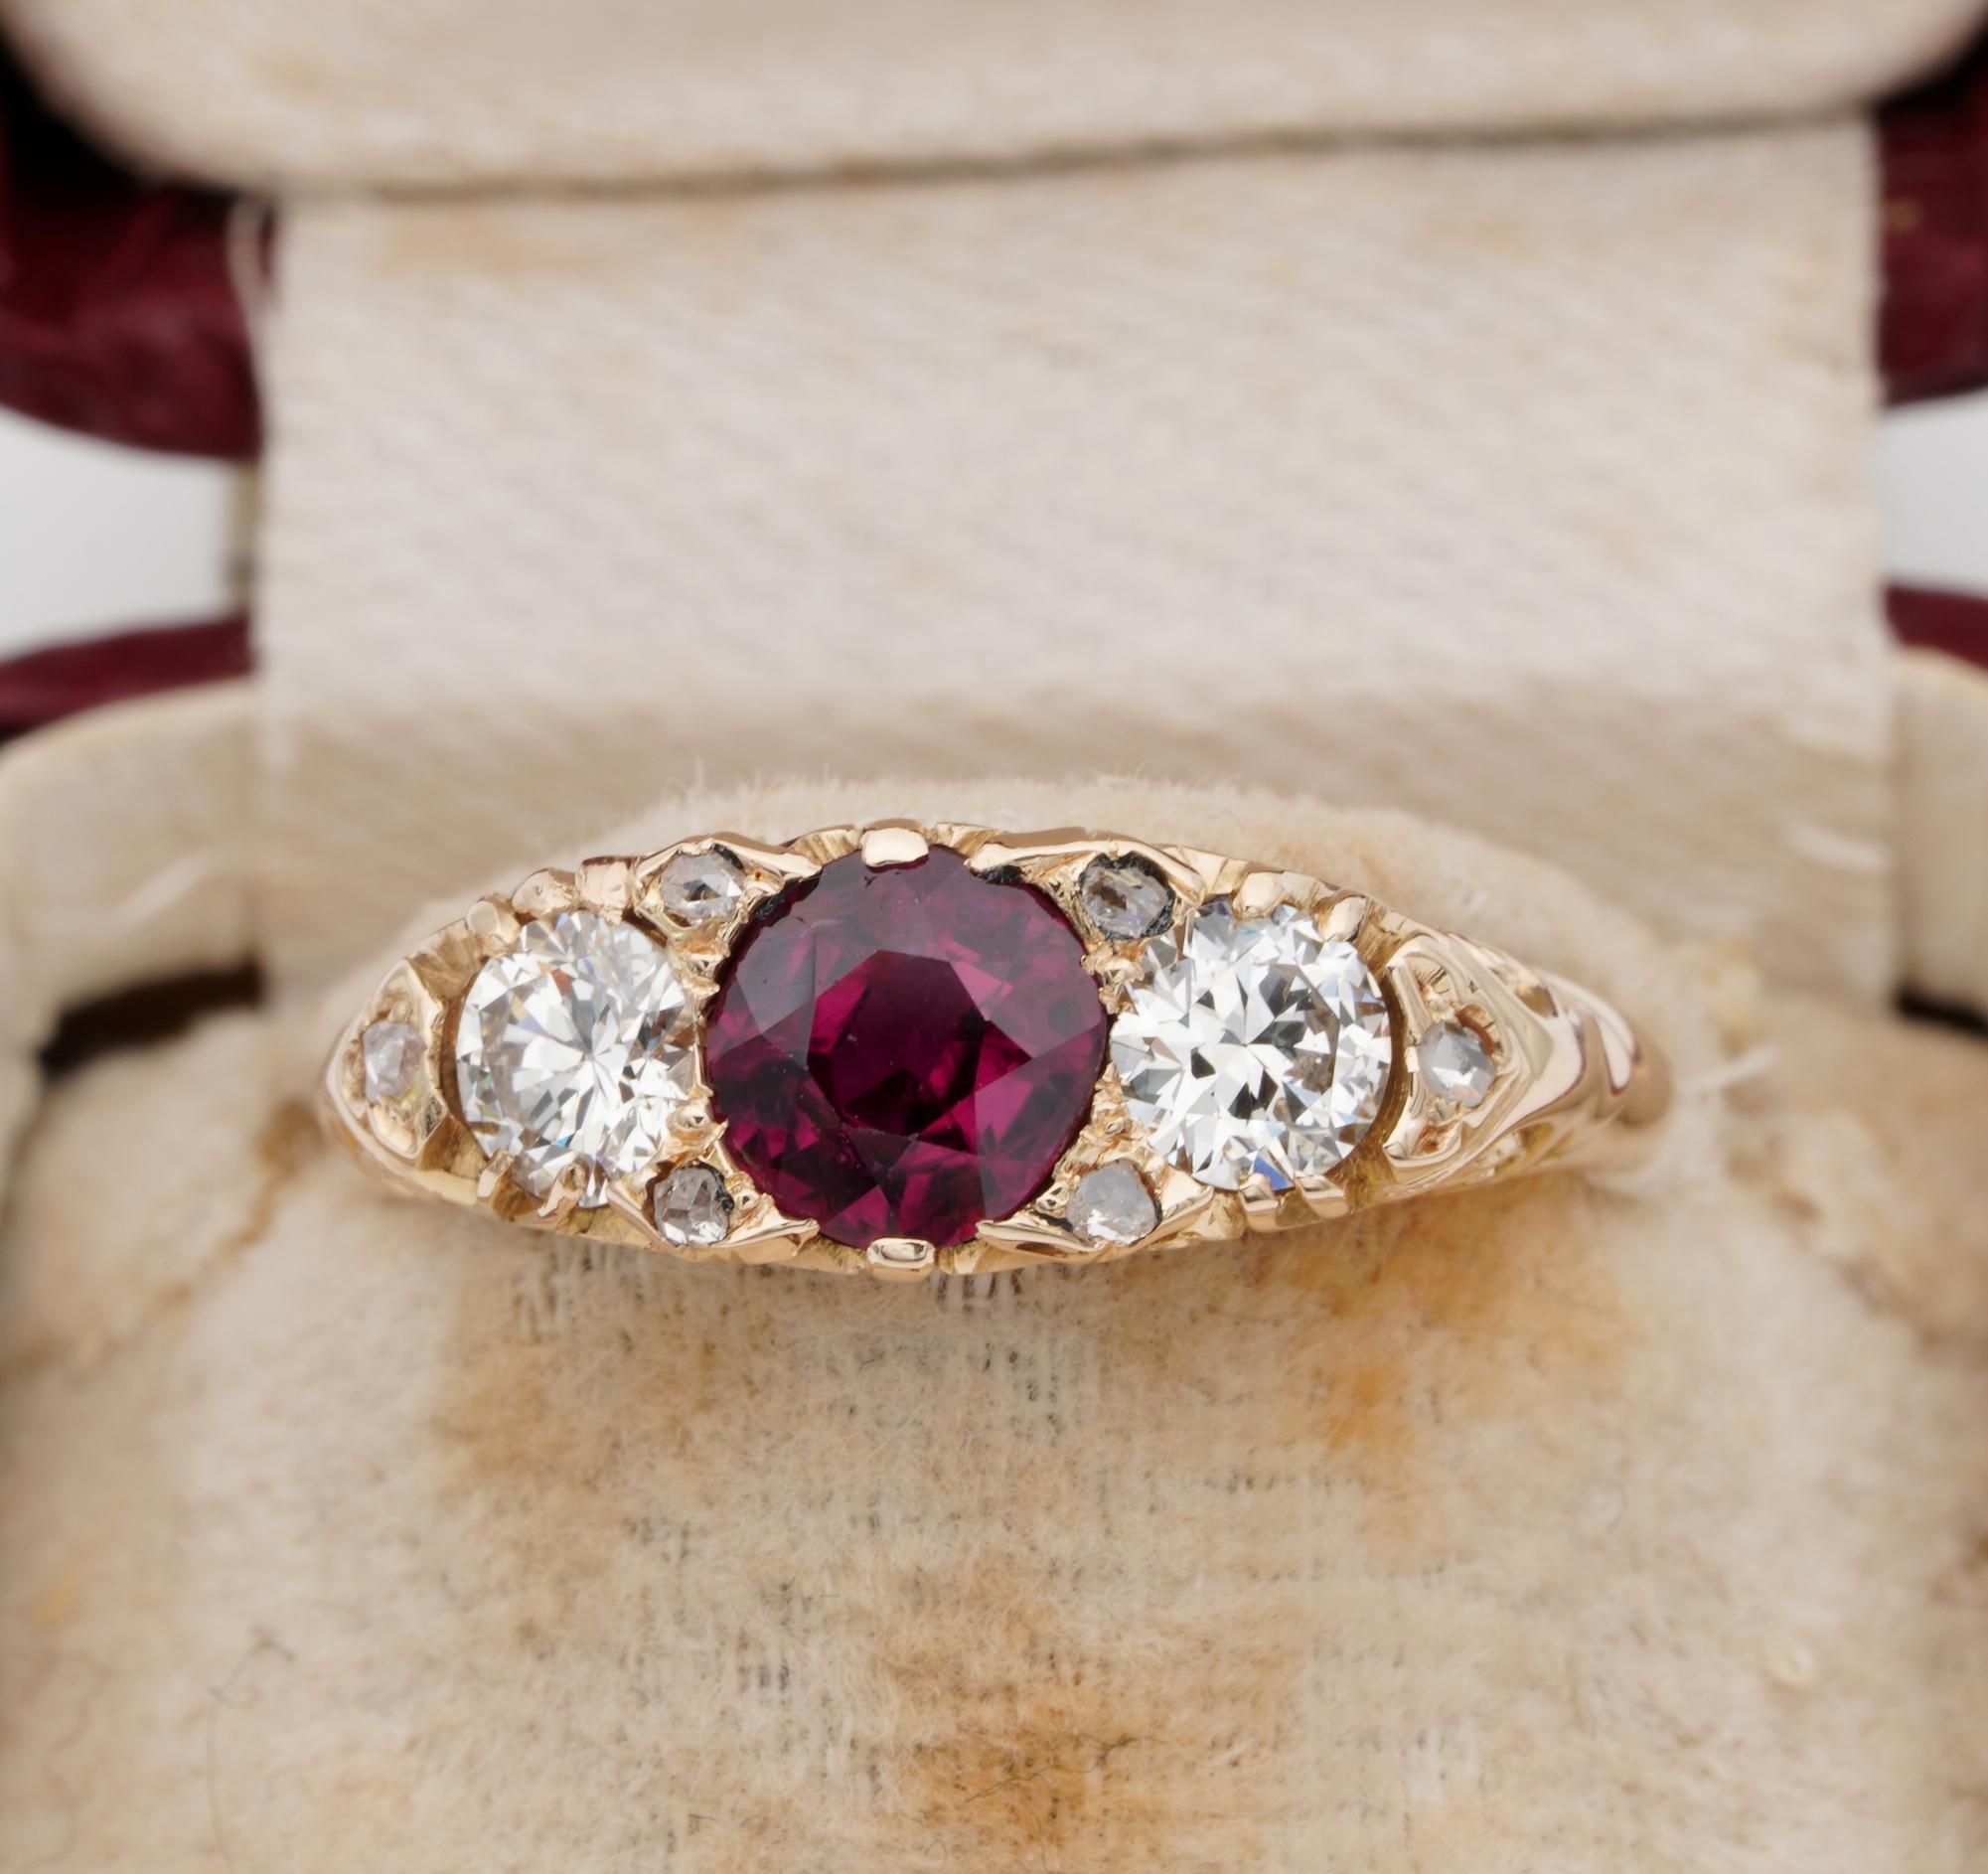 Beautiful antique Victorian period three stone ring, 1890/1900 ca
Lovely half hoop mounting exquisitely hand carved at best refined work of the time – 18 KT solid gold marked
Magnificent quality of Natural Ruby, intense Red, richly saturated, very